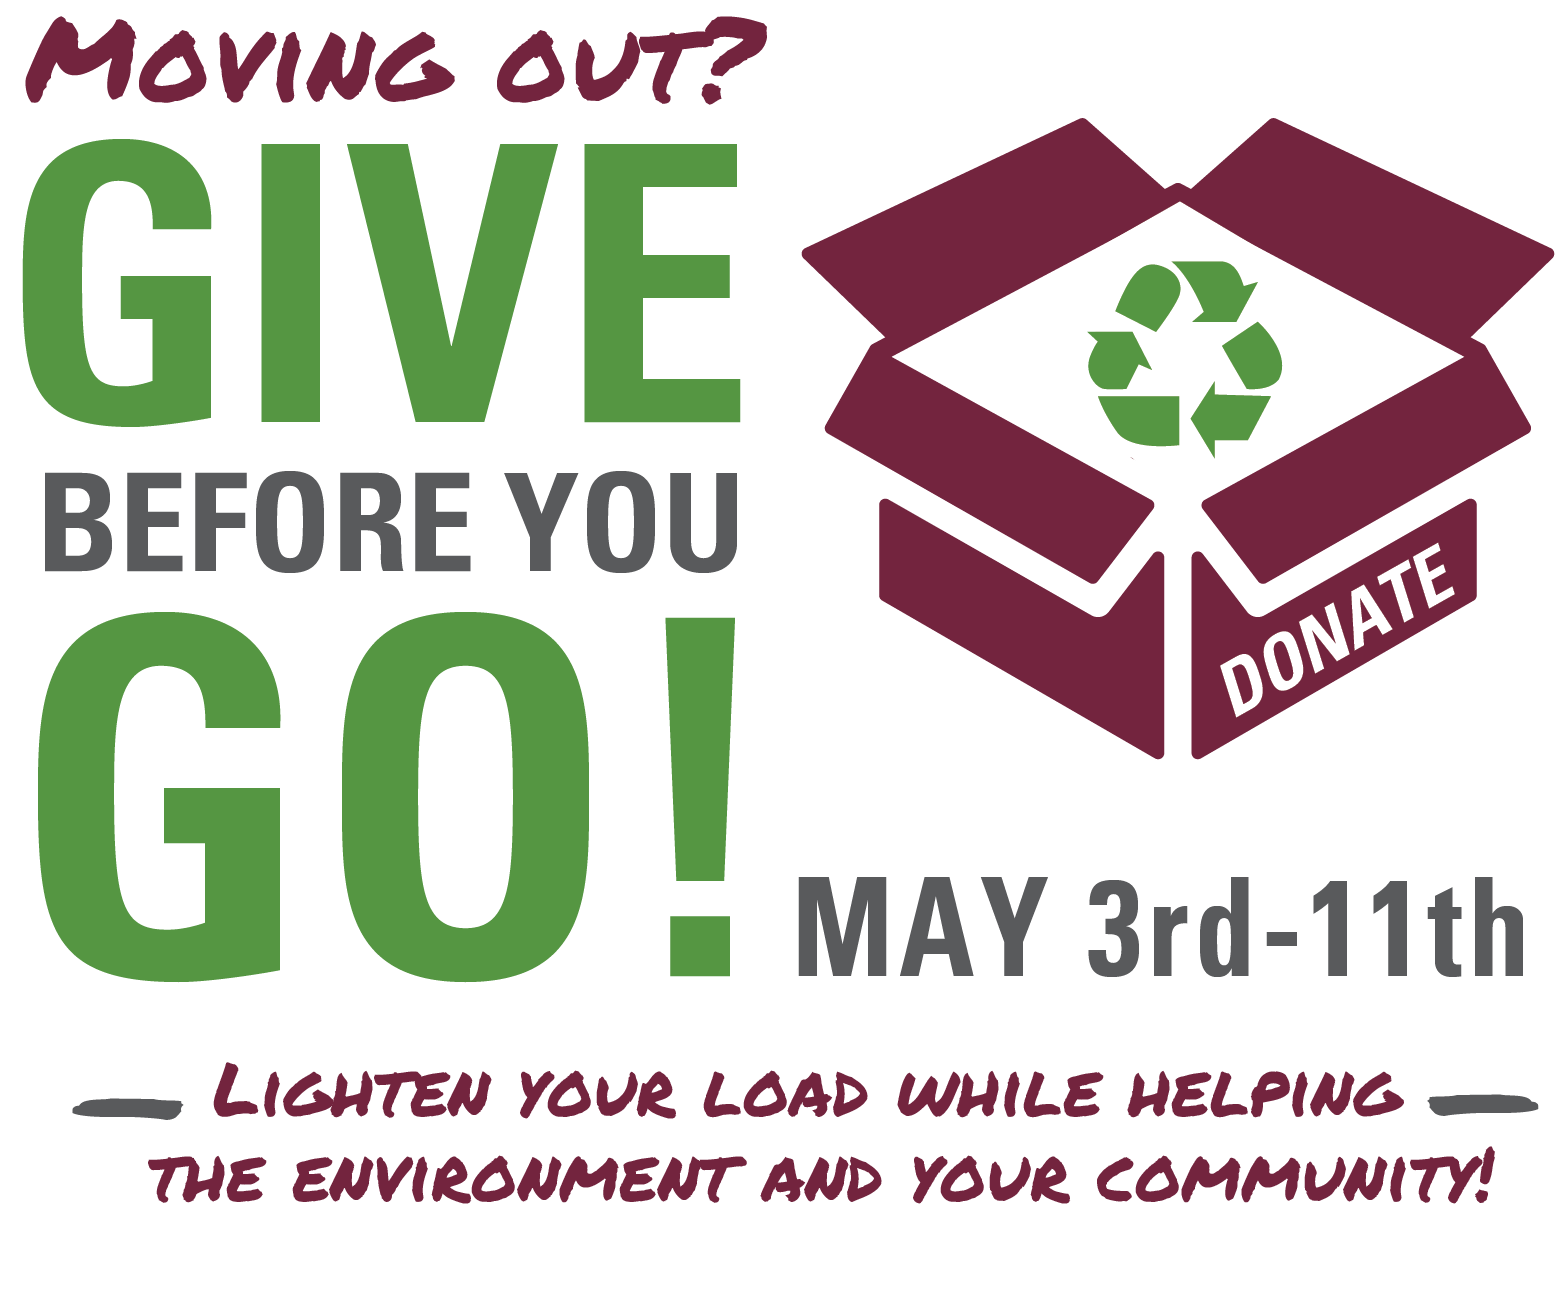 Moving out? Give before you go! Donate May 3rd - 11th. Lighten your load while helping the environment and your community!